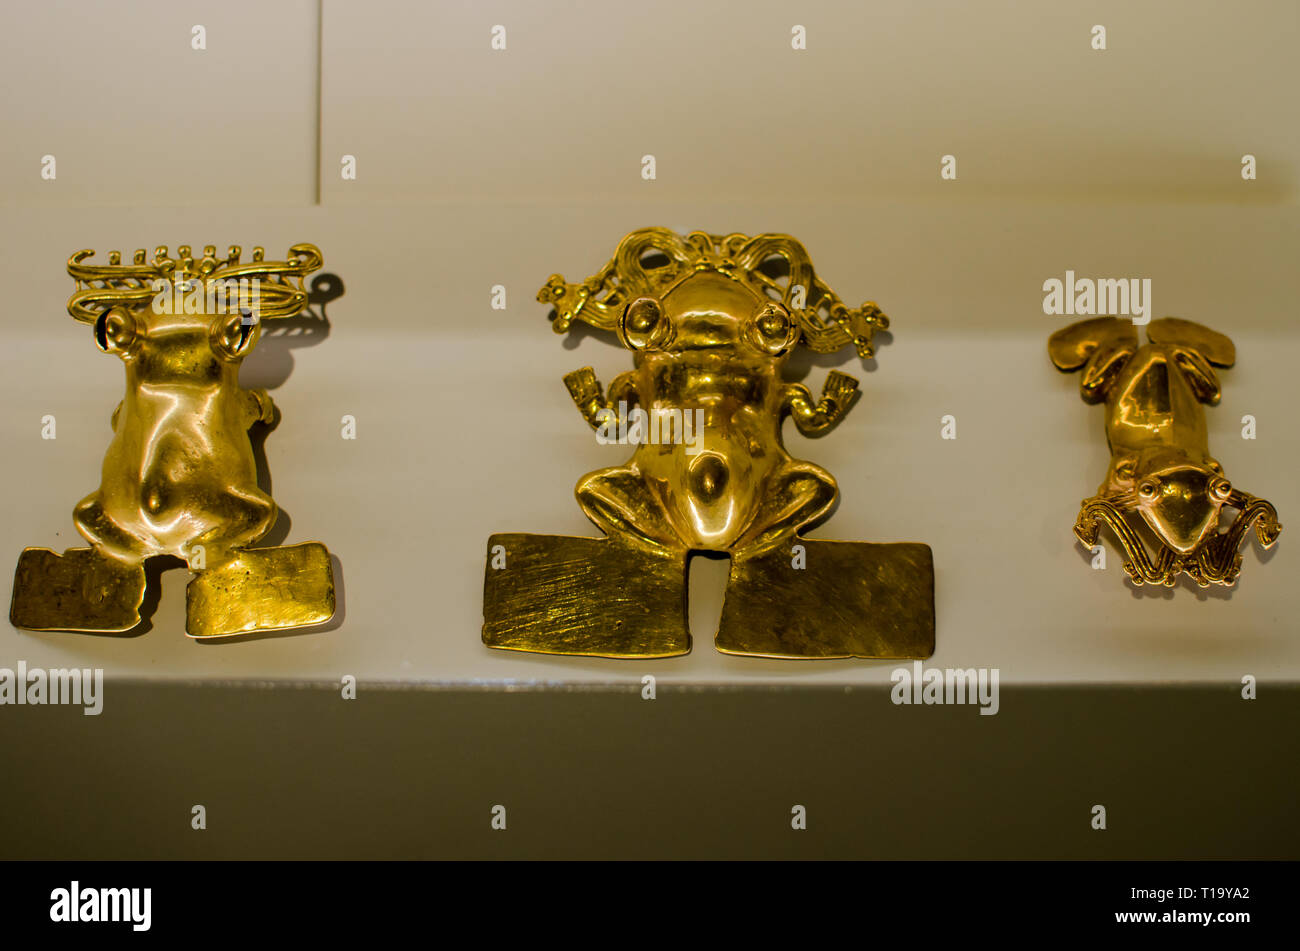 Gold frogs exhibited at Pre-Columbian Gold Museum in San Jose Costa Rica Stock Photo